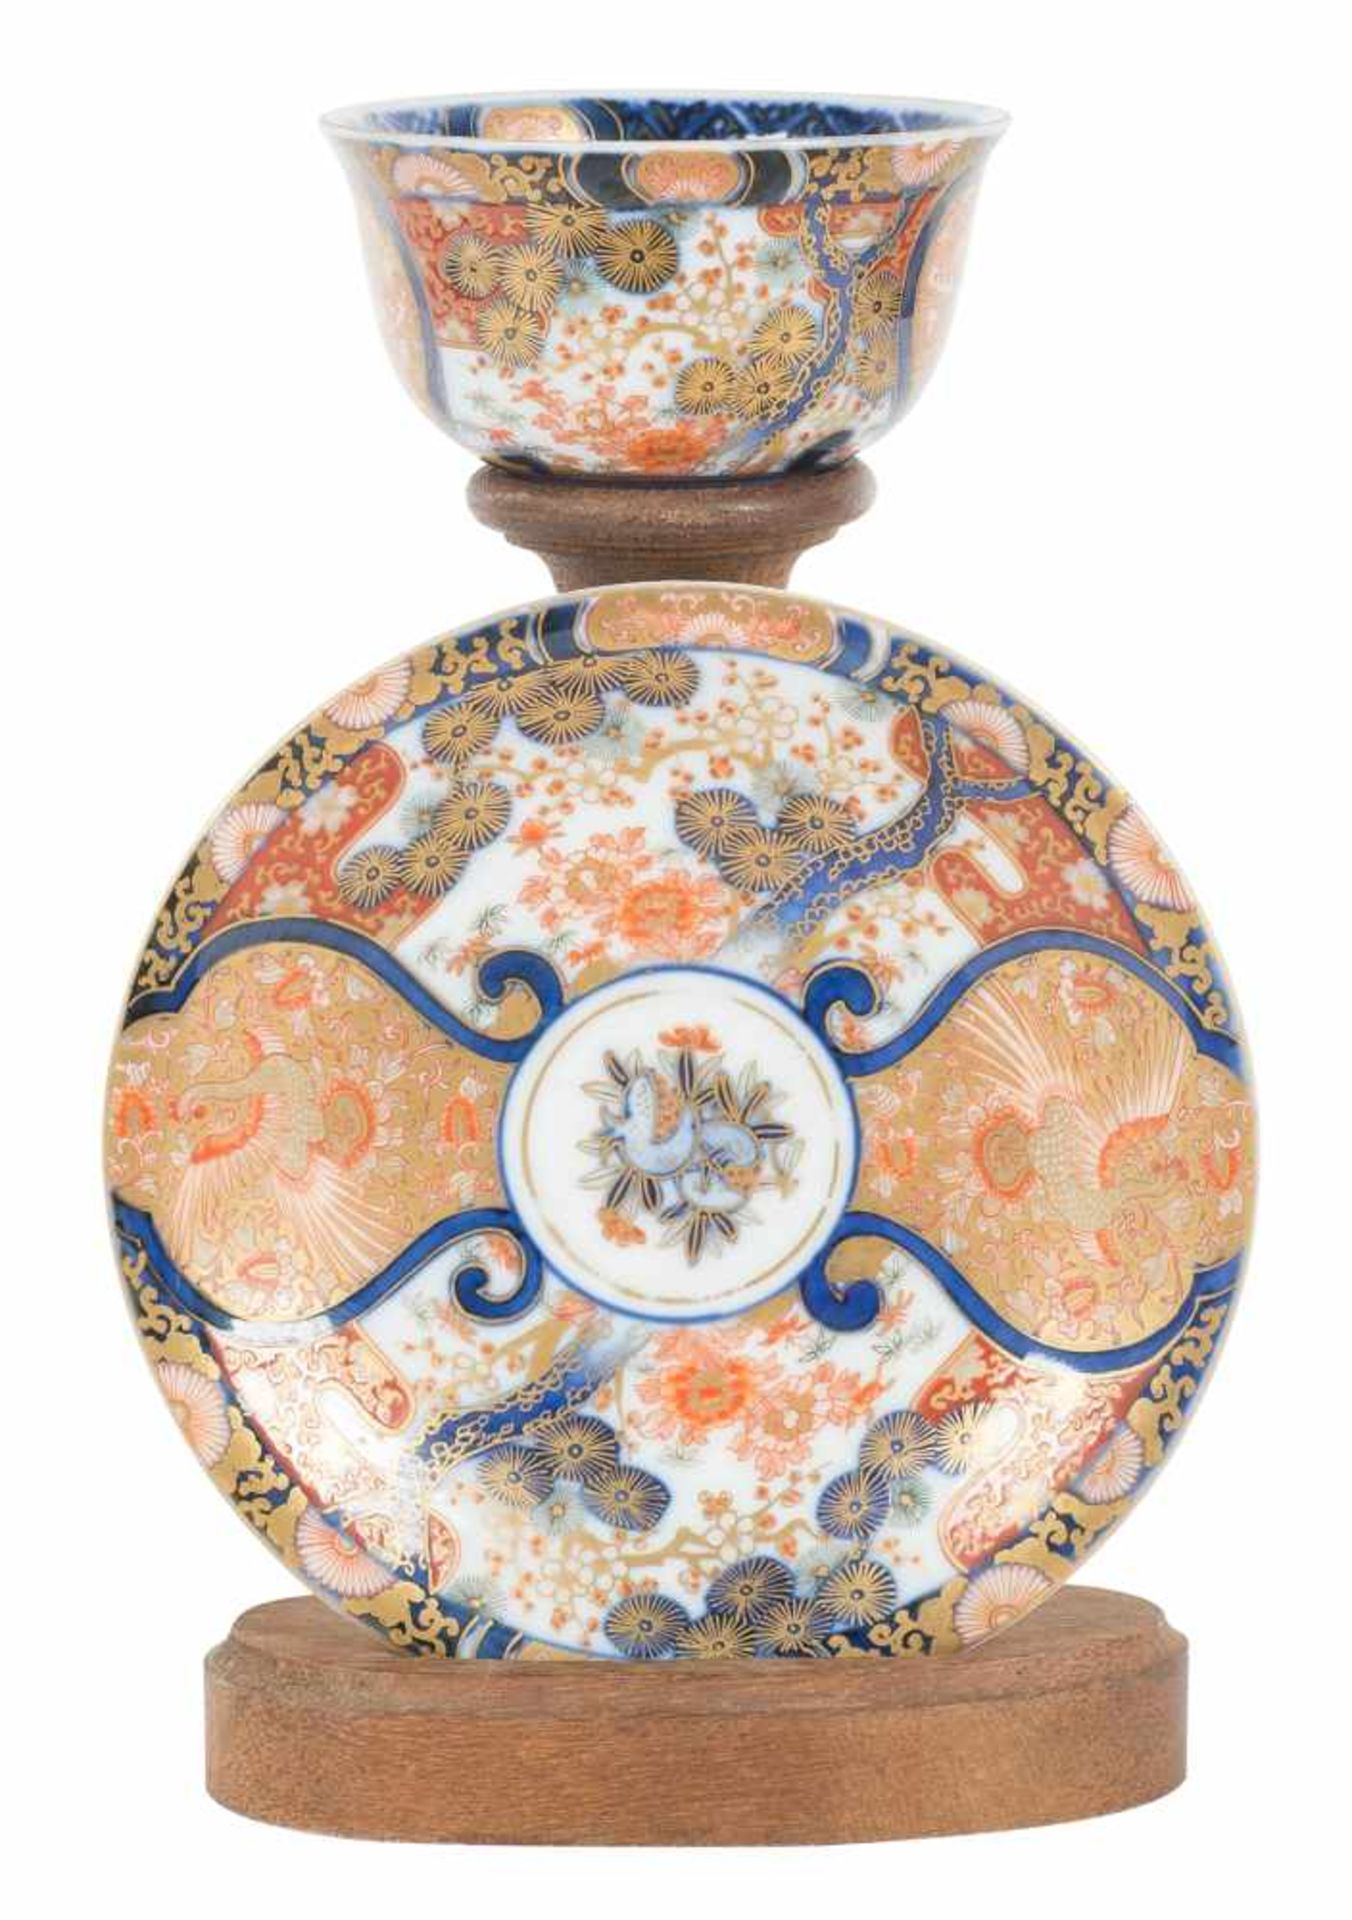 A Japanese Kenjo Imari style cup and saucer basin. Meiji-Taisho period. Late 19th century-early 20th